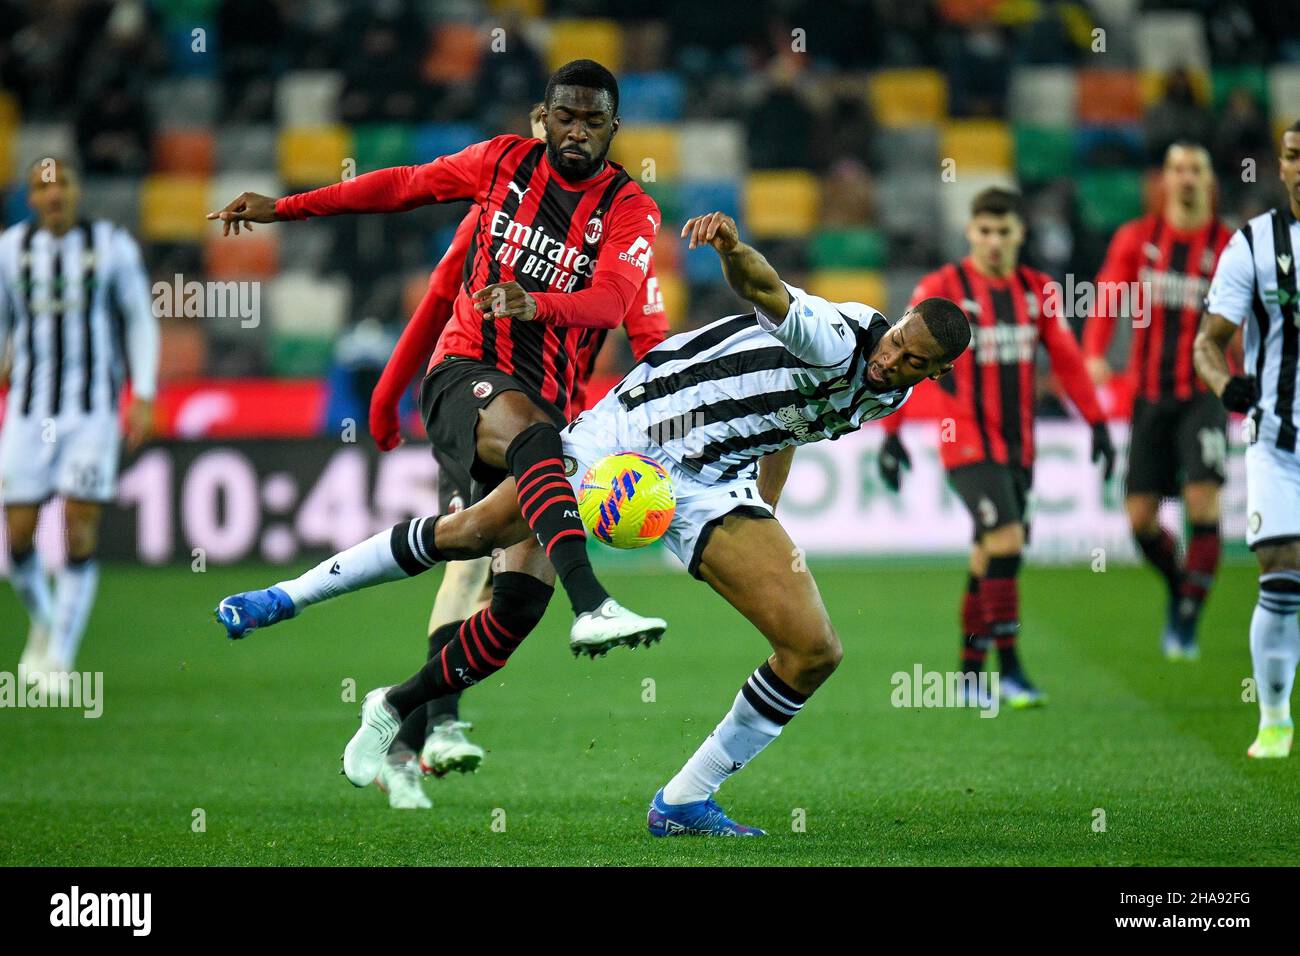 Udine, Italy. 11th Dec, 2021. Milan's Fikayo Tomori (Milan) in action against Udinese's Norberto Bercique Gomes Betuncal during Udinese Calcio vs AC Milan, italian soccer Serie A match in Udine, Italy, December 11 2021 Credit: Independent Photo Agency/Alamy Live News Stock Photo